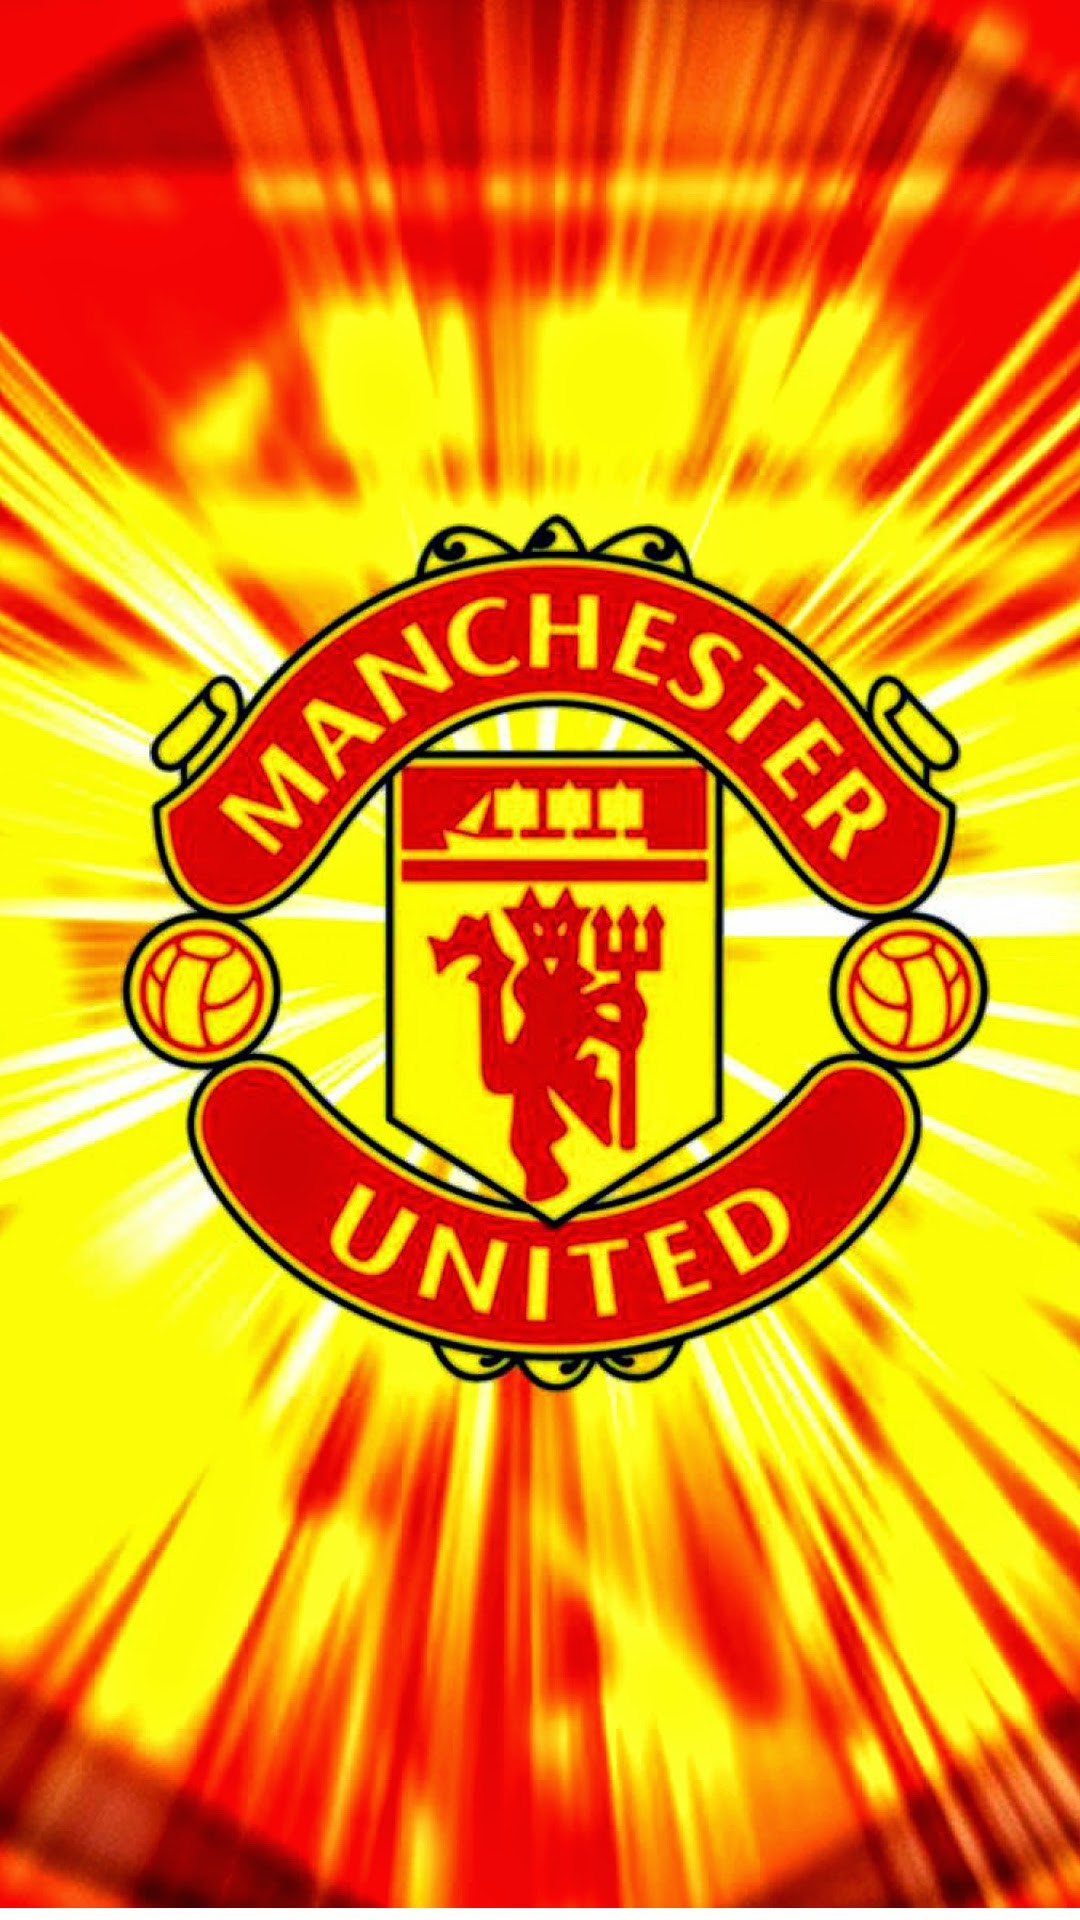 Apple Iphone 6 Plus Hd Wallpaper Collection With Manchester - Iphone Logo Manchester United - HD Wallpaper 